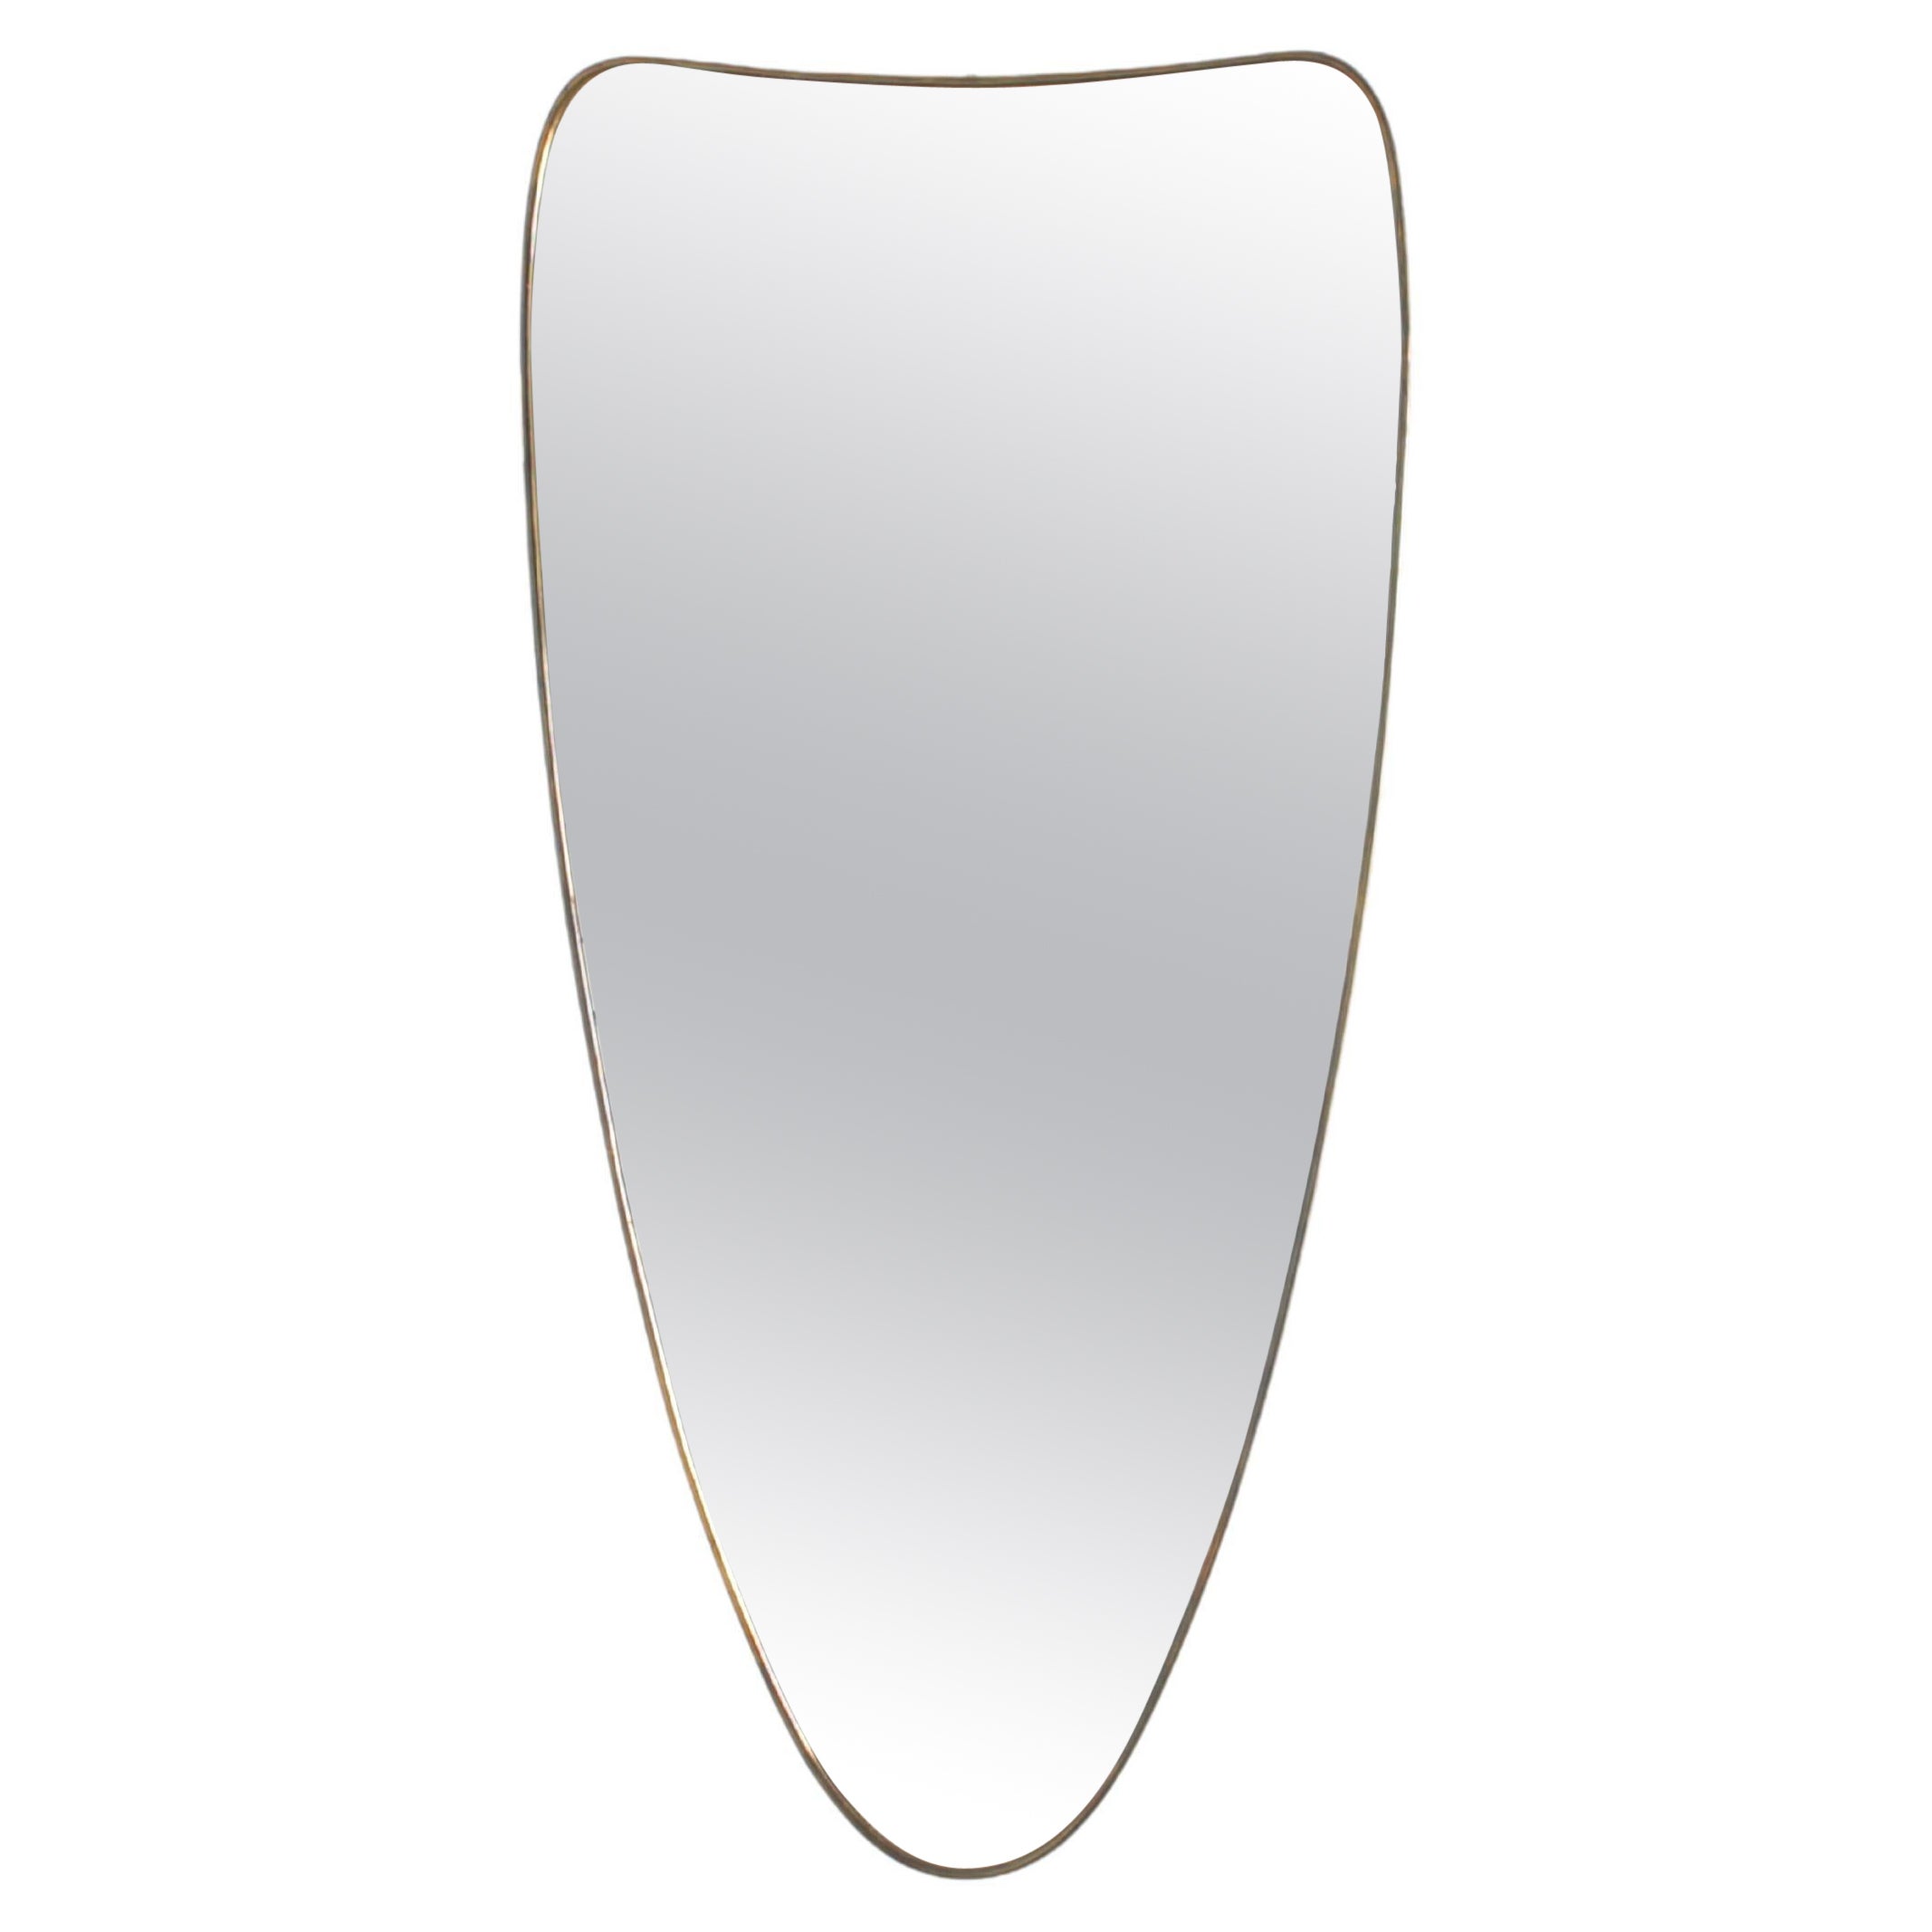 Mid-Century G. Ponti Style Shield-Shaped Wall Mirror with Brass Frame 50s Italy For Sale